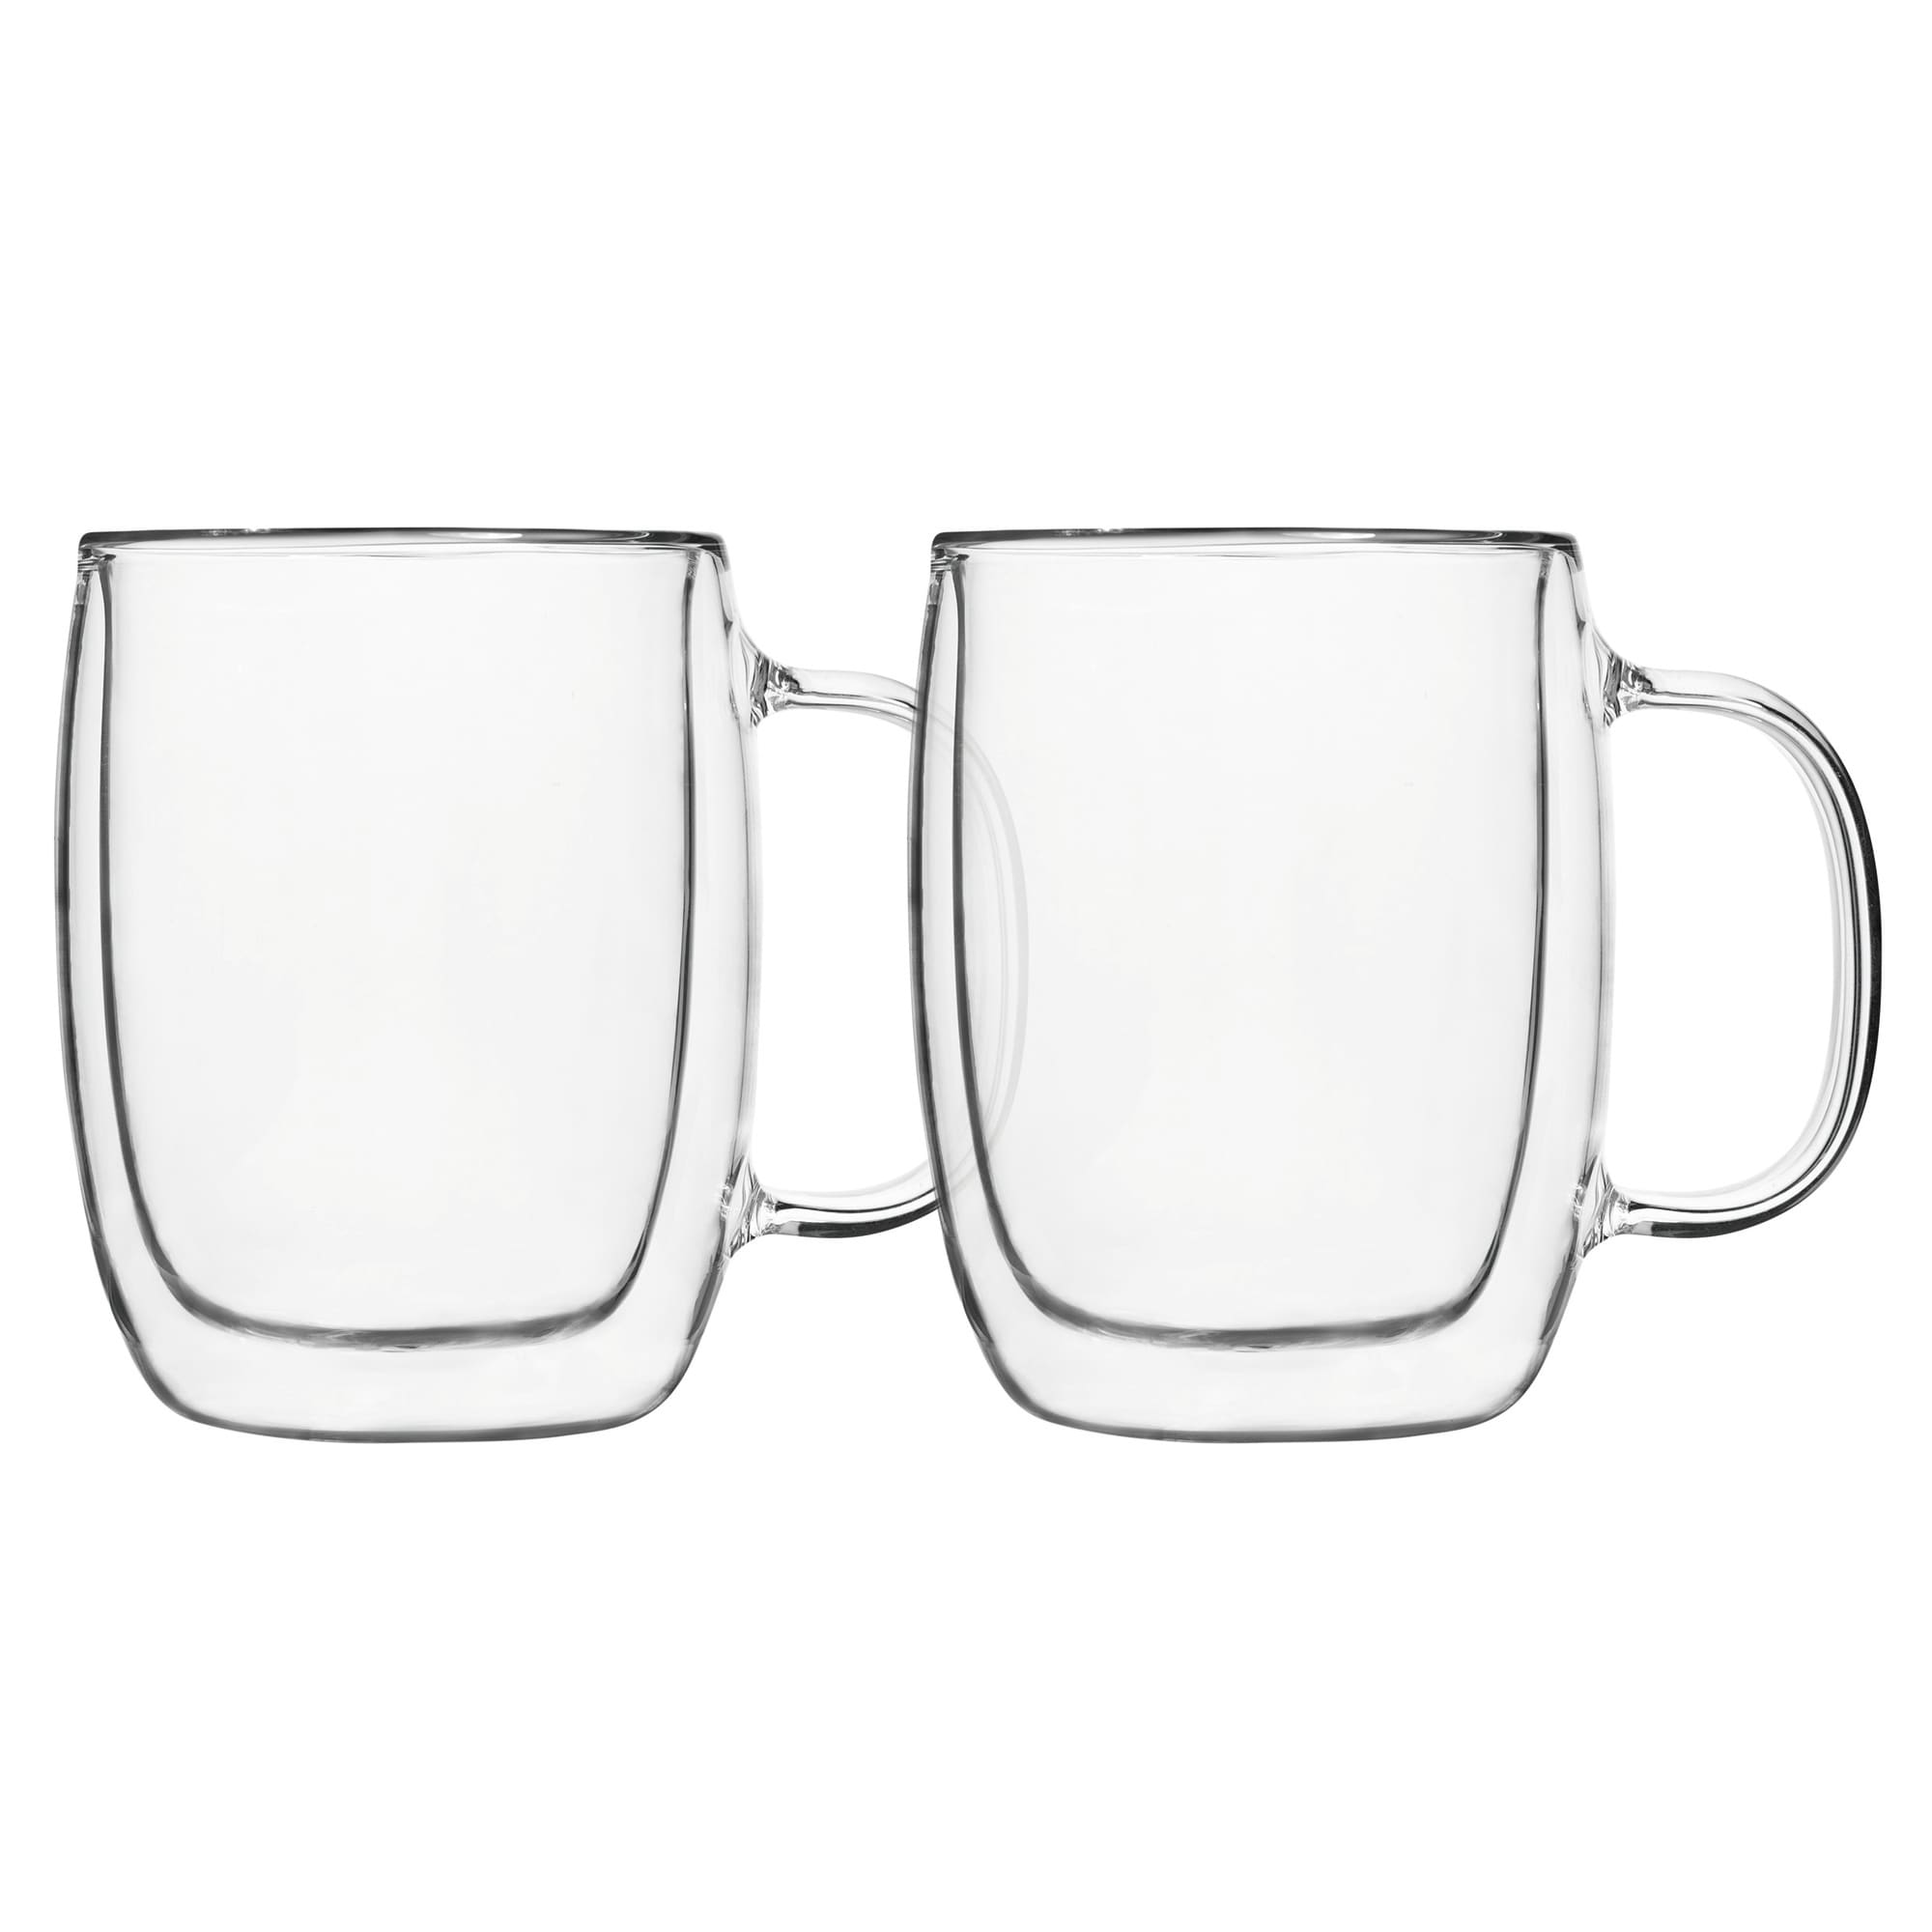 https://ak1.ostkcdn.com/images/products/is/images/direct/f679a0012867bb3cf04f23f1ee0de38b943ad98f/Insulated-Double-Wall-Mug-Cup-Glass-Set-of-4-Mugs-Cups-Thermal%2C350ml.jpg